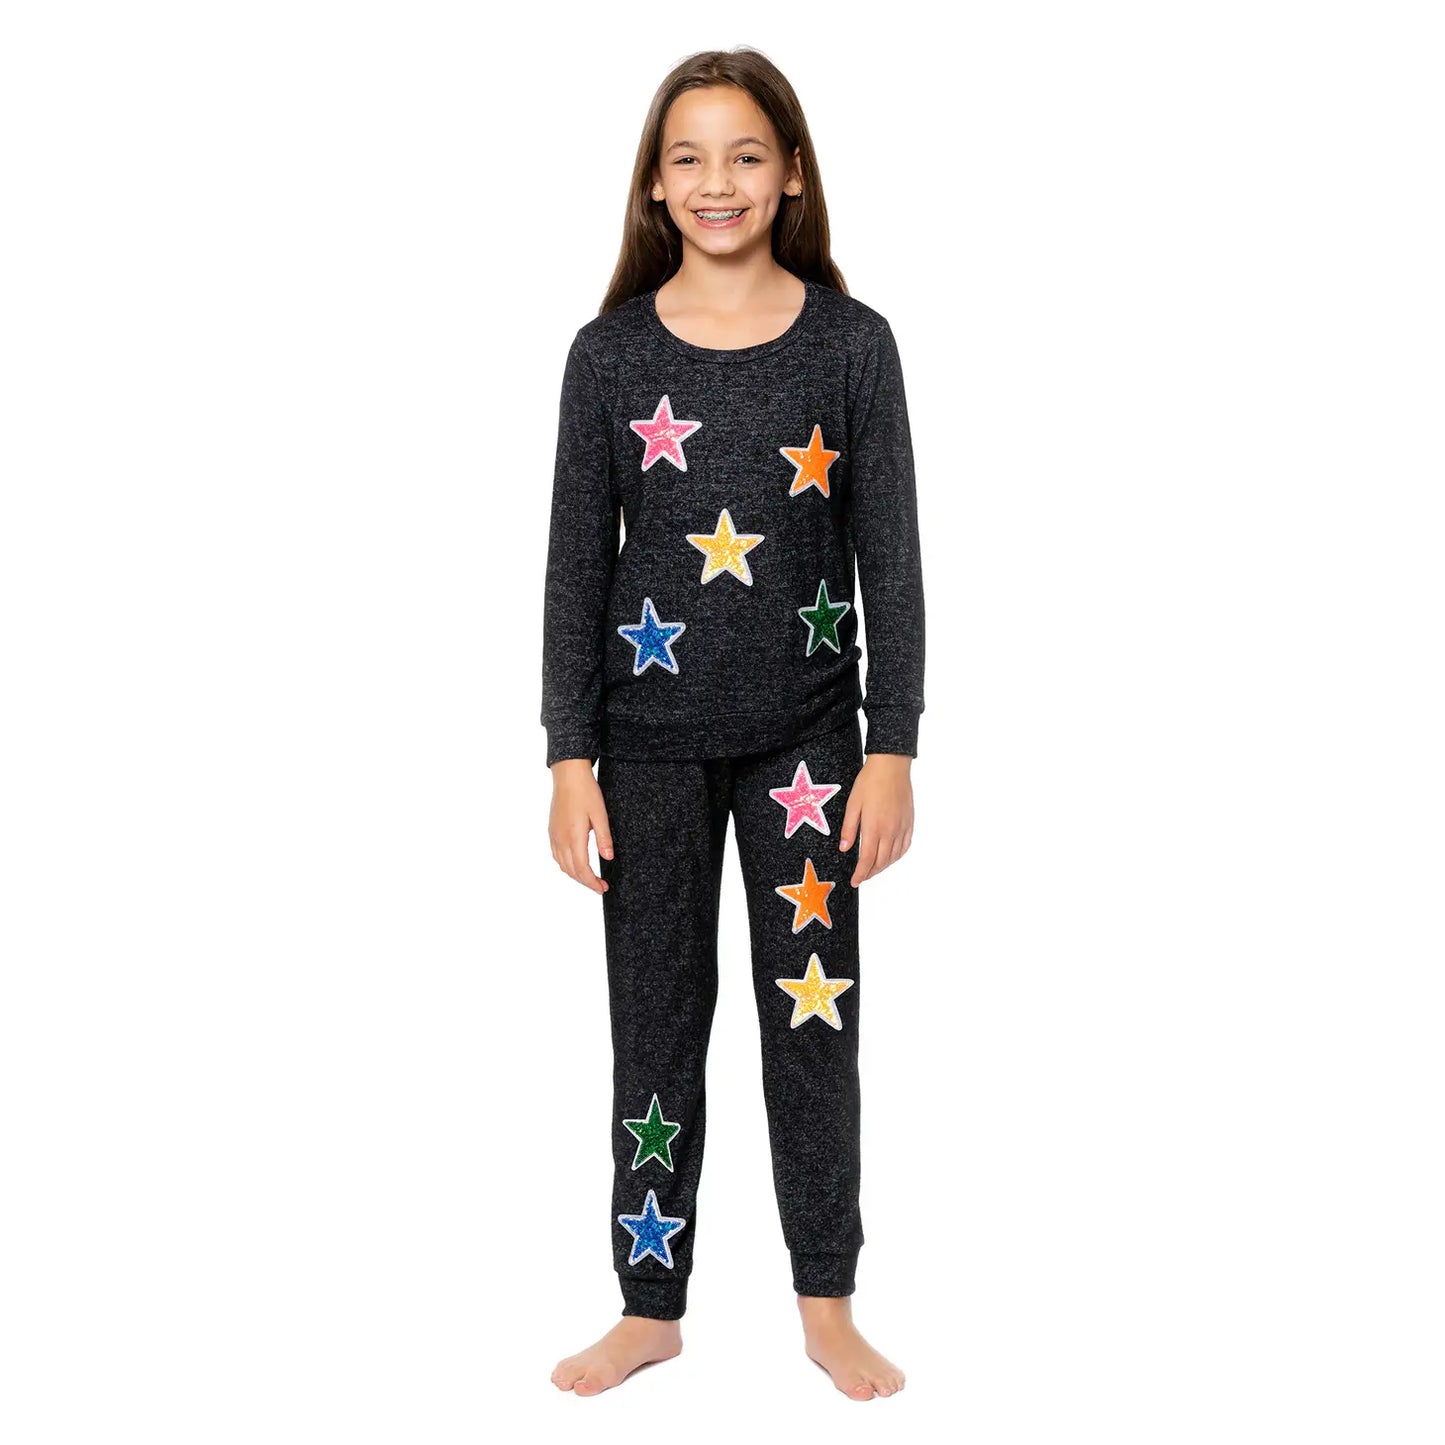 Sequin Star Patch Charcoal Long Sleeve Top